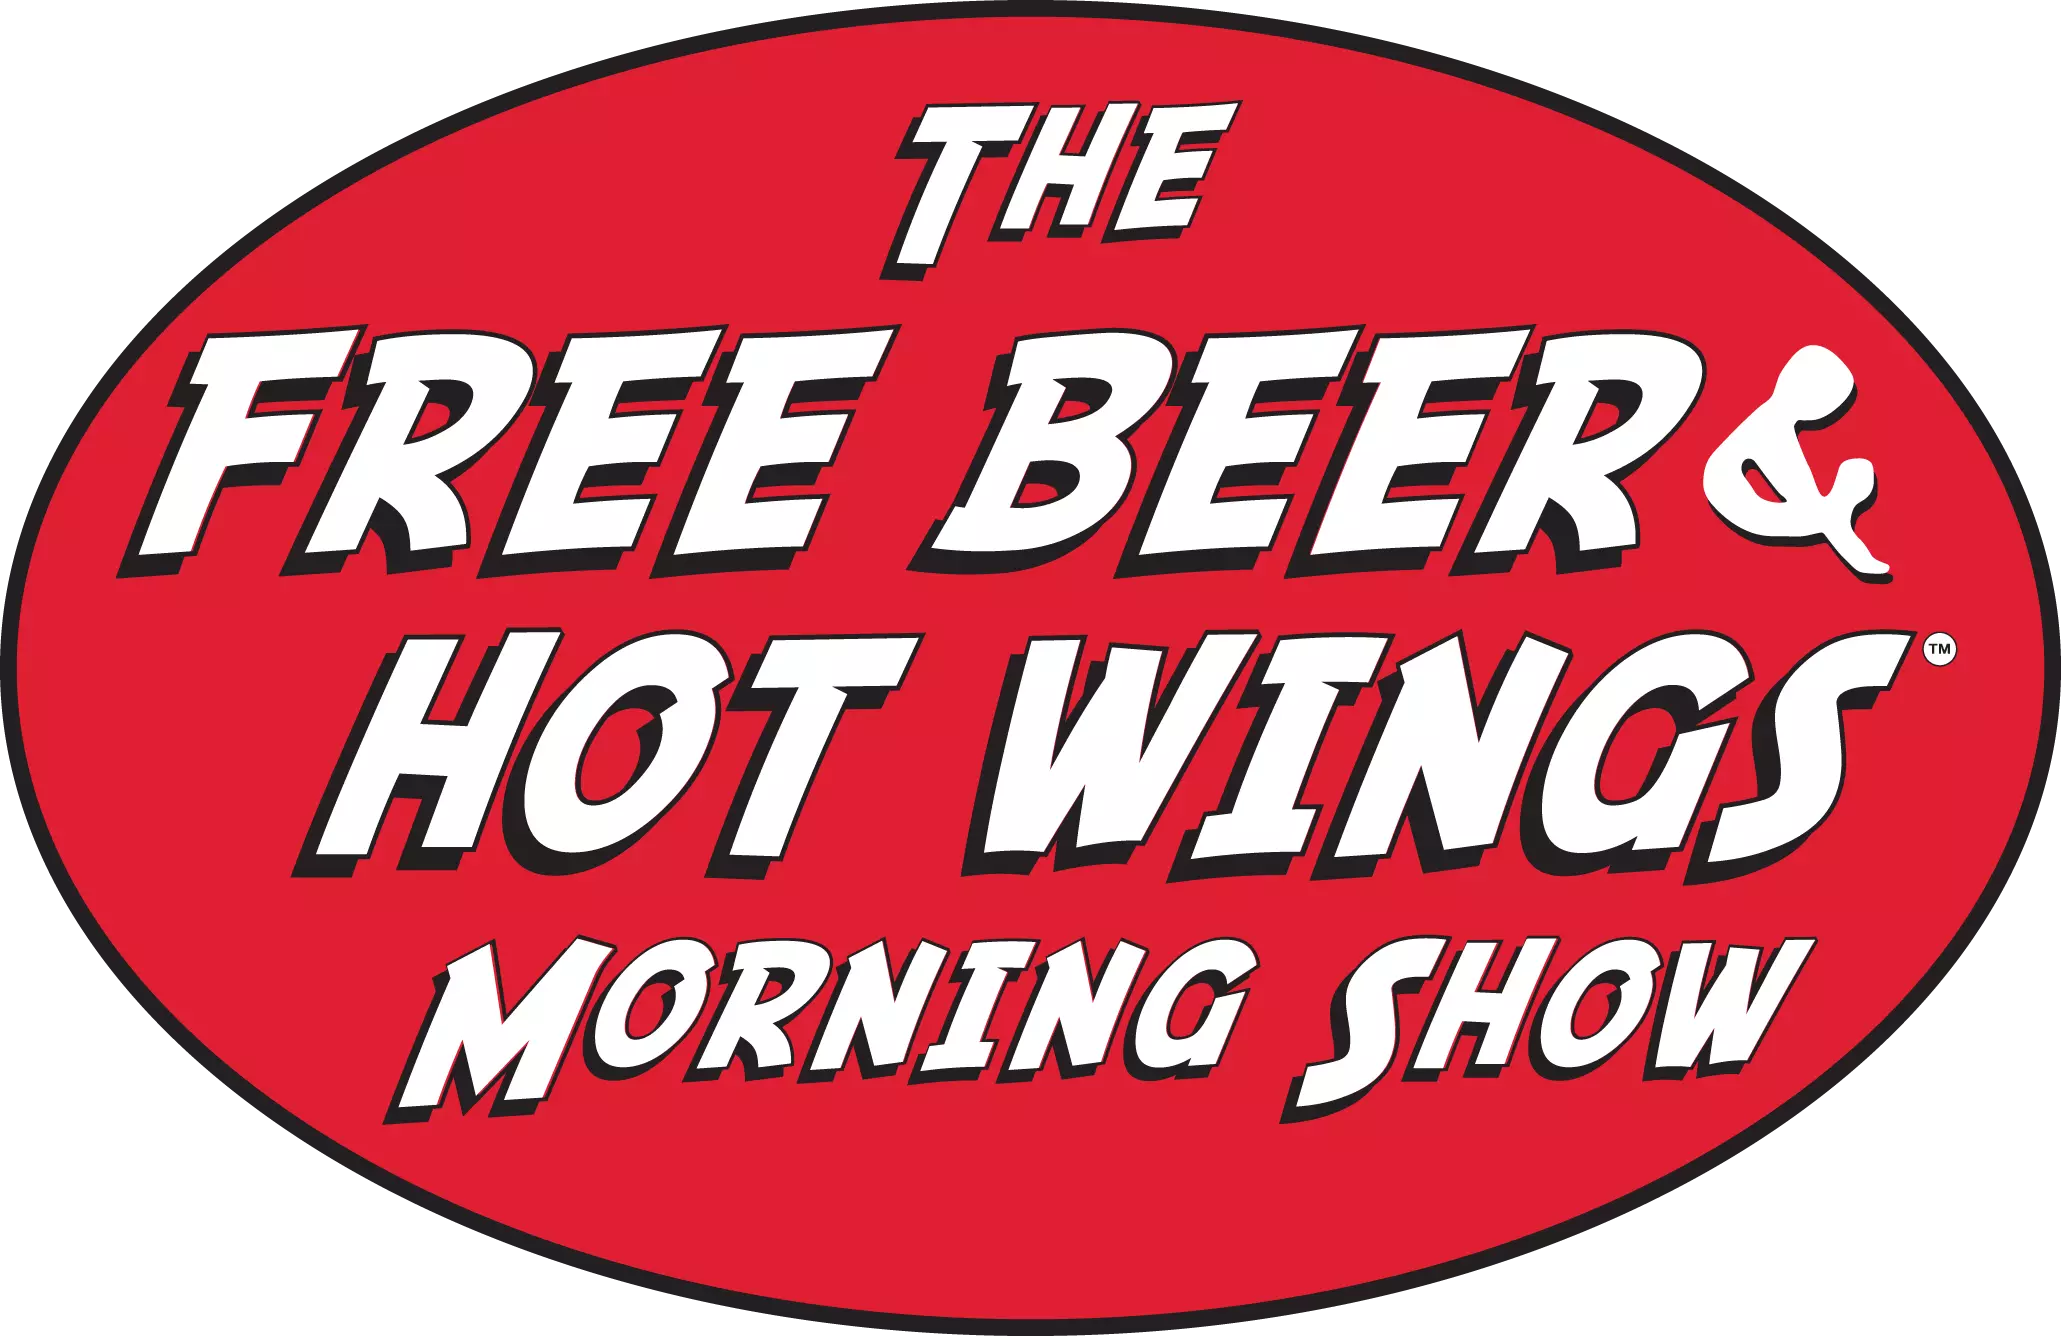 listen to free beer and hot wings online